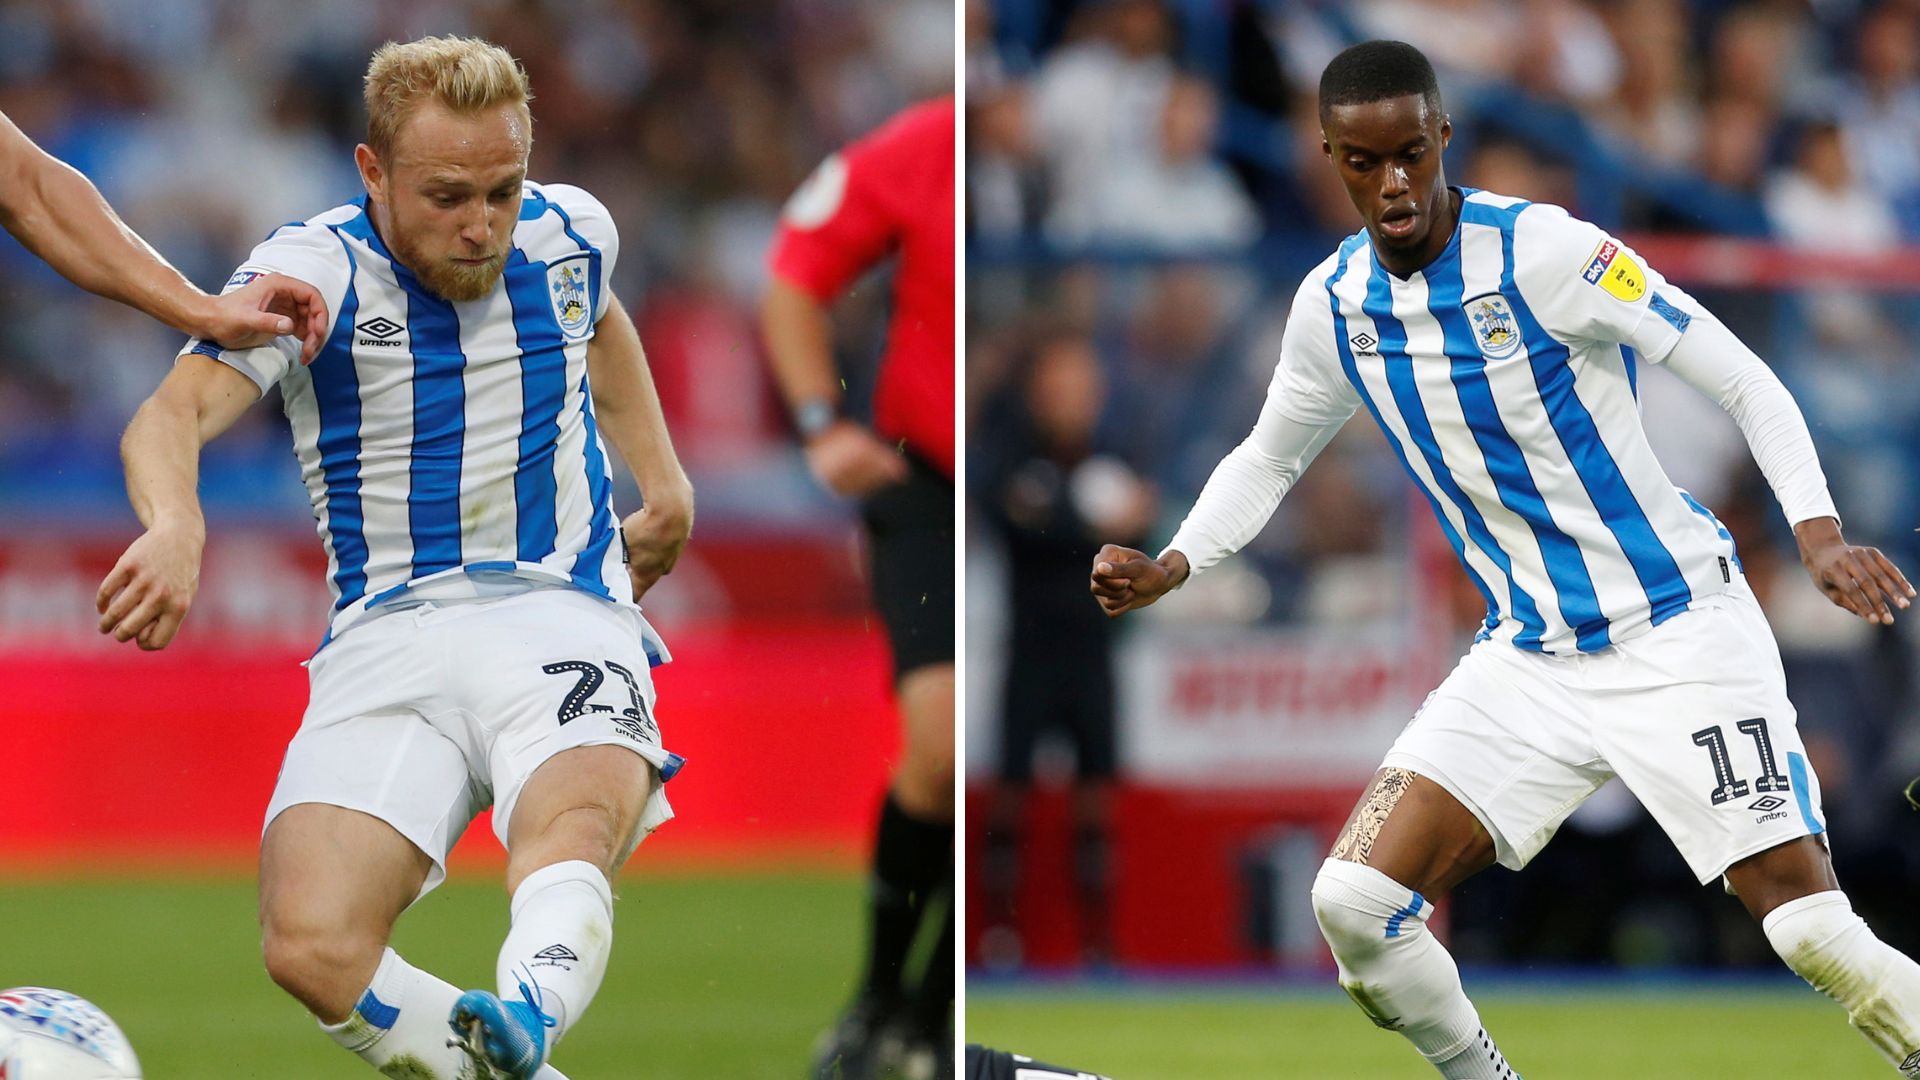 Pritchard and Diakhaby - Huddersfield Town 